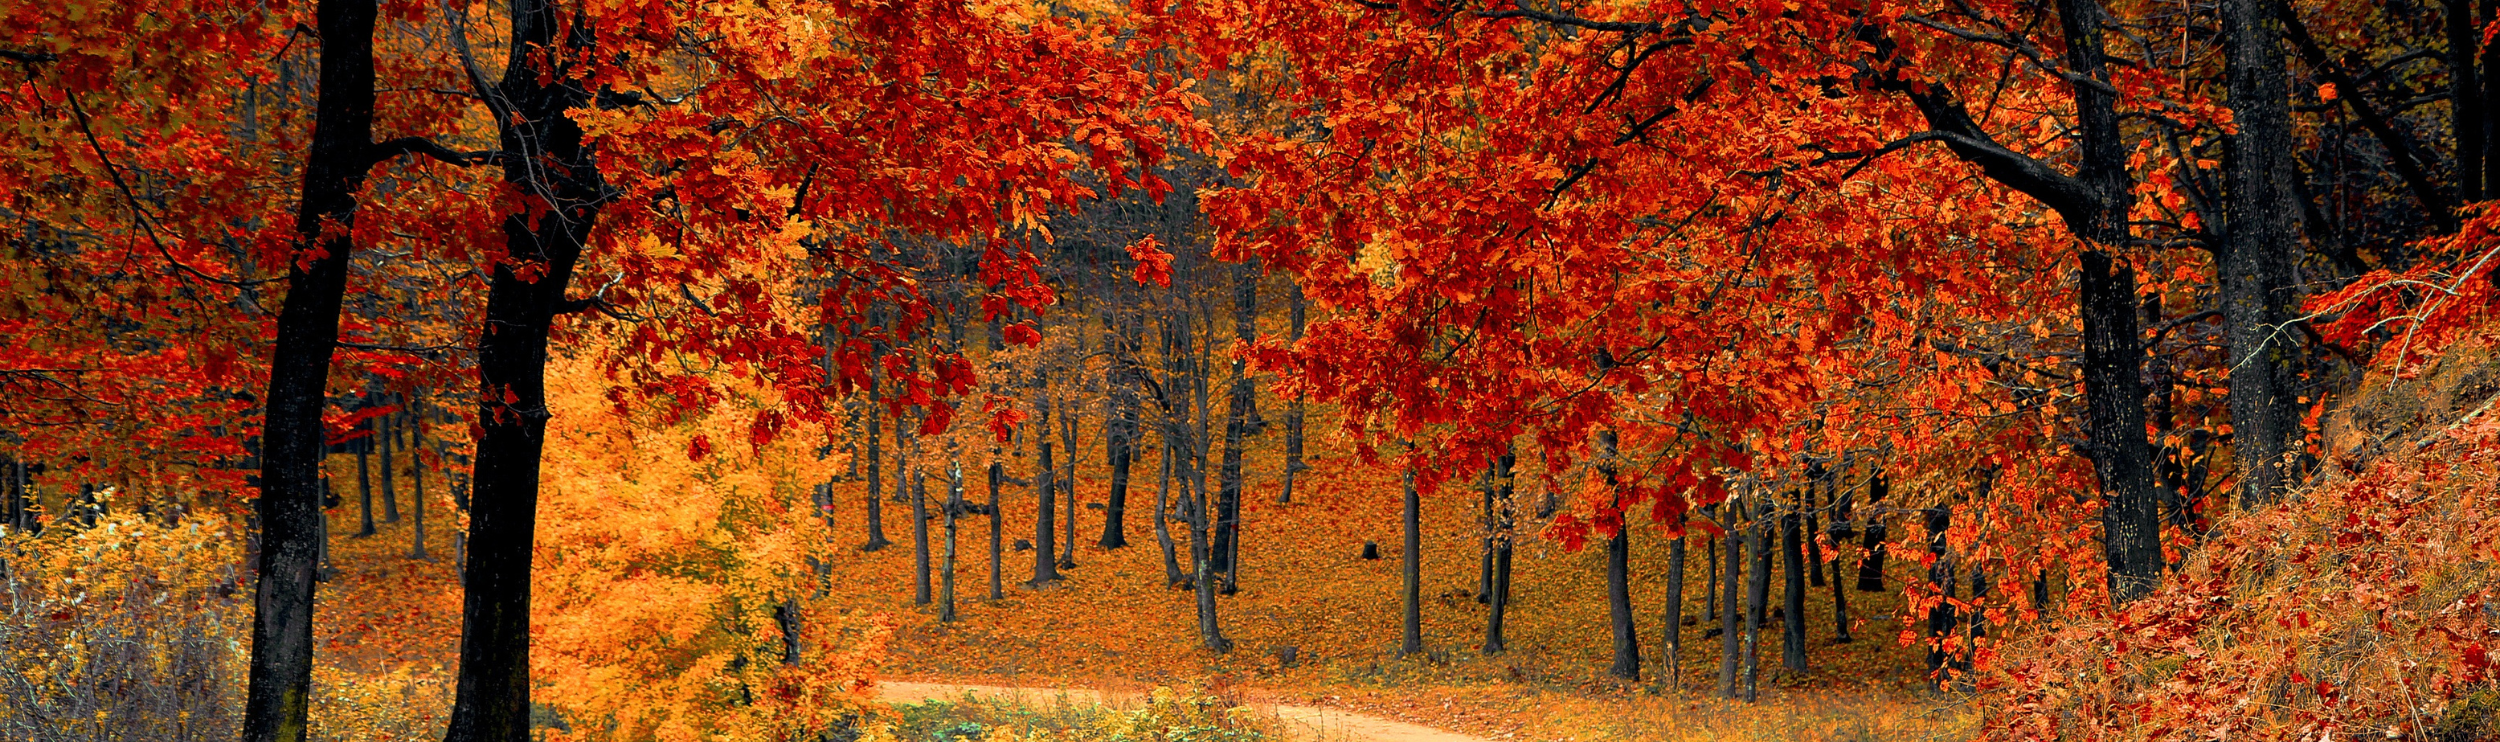 Row of autumn trees with leaves falling